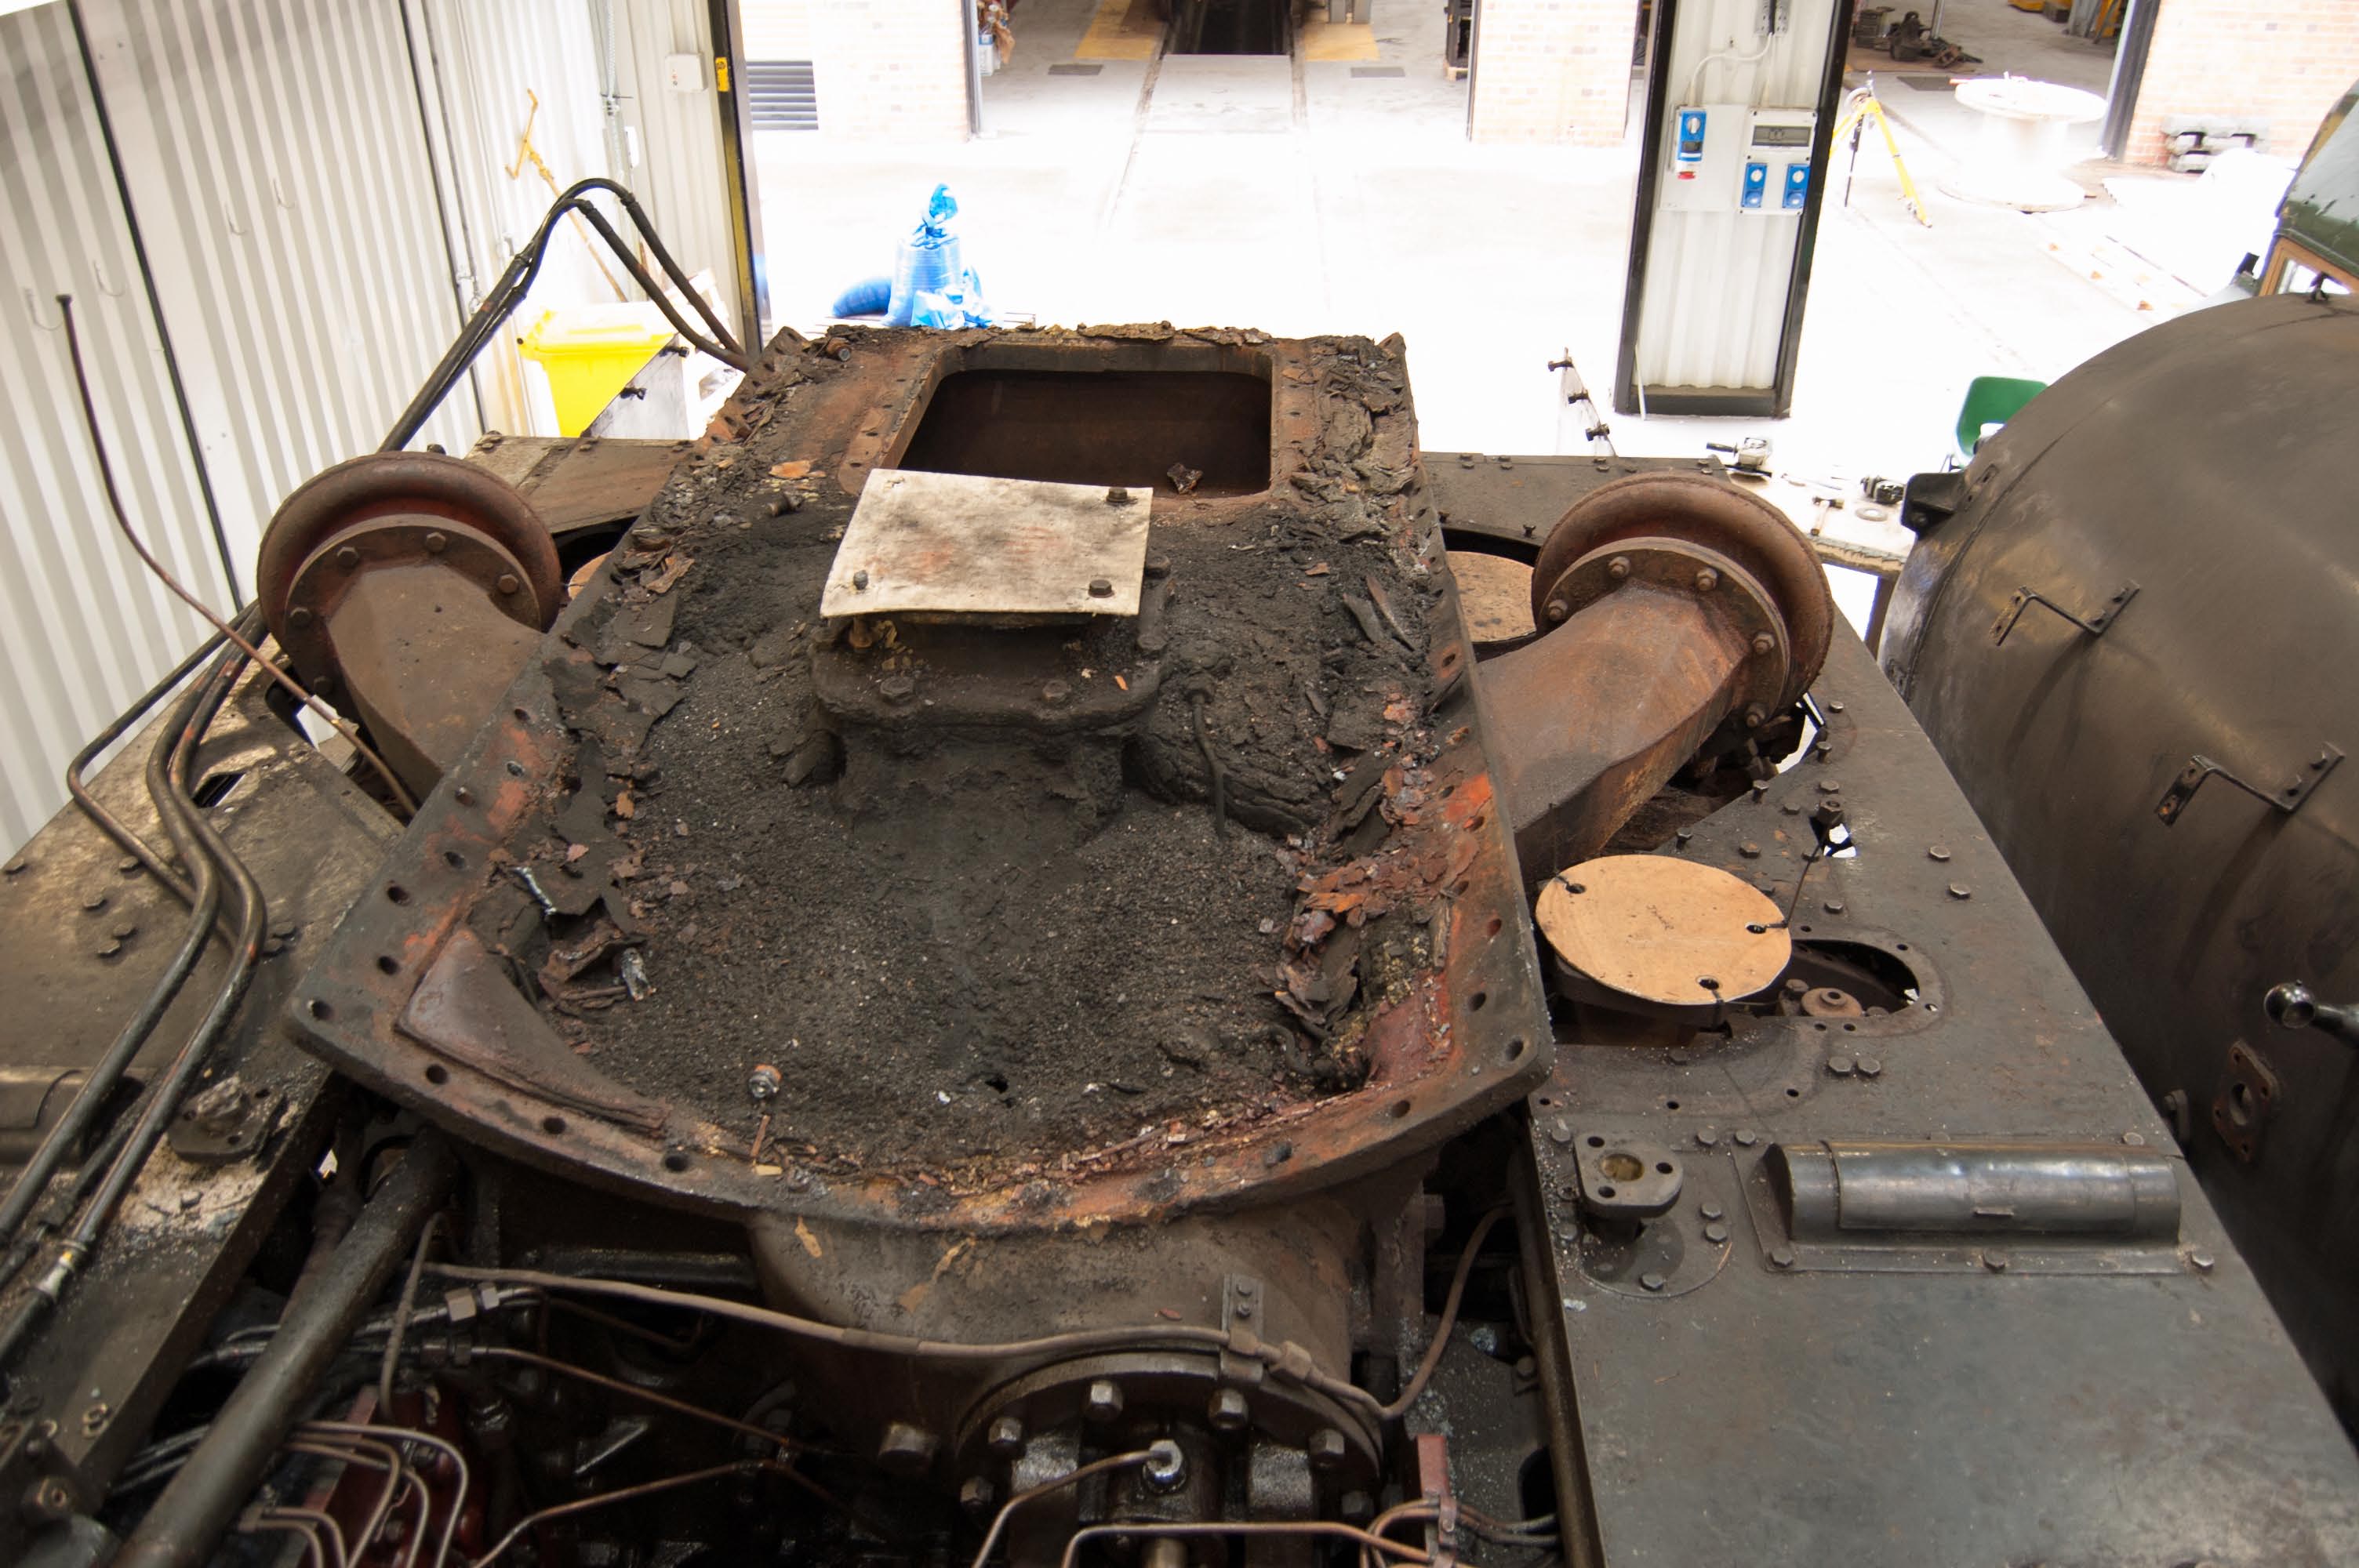 The saddle, showing the accumulation of debris under the smokebox